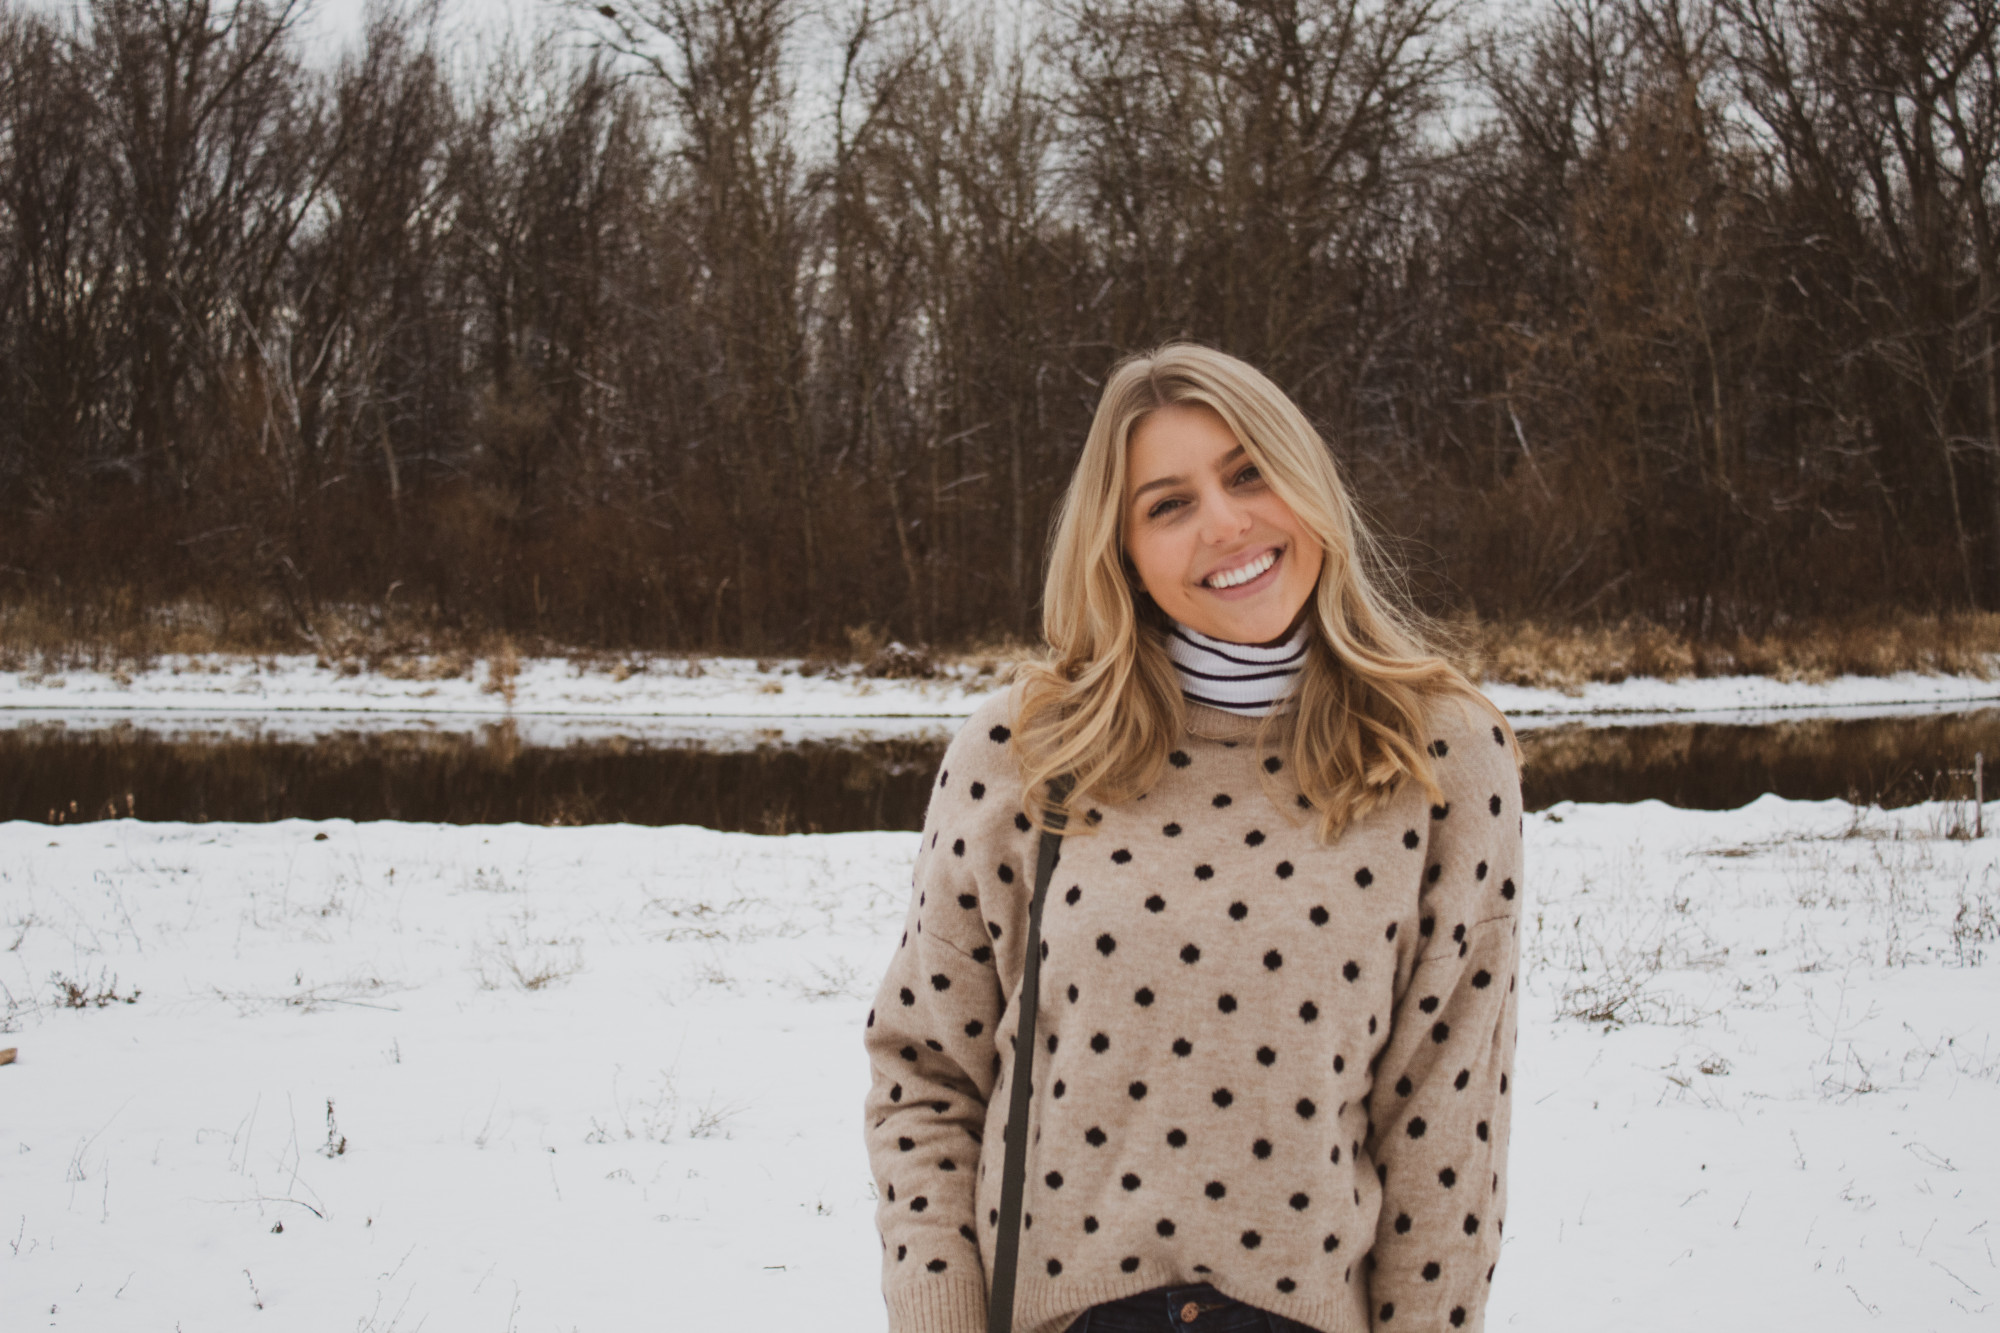 polka dot sweater with striped turtleneck